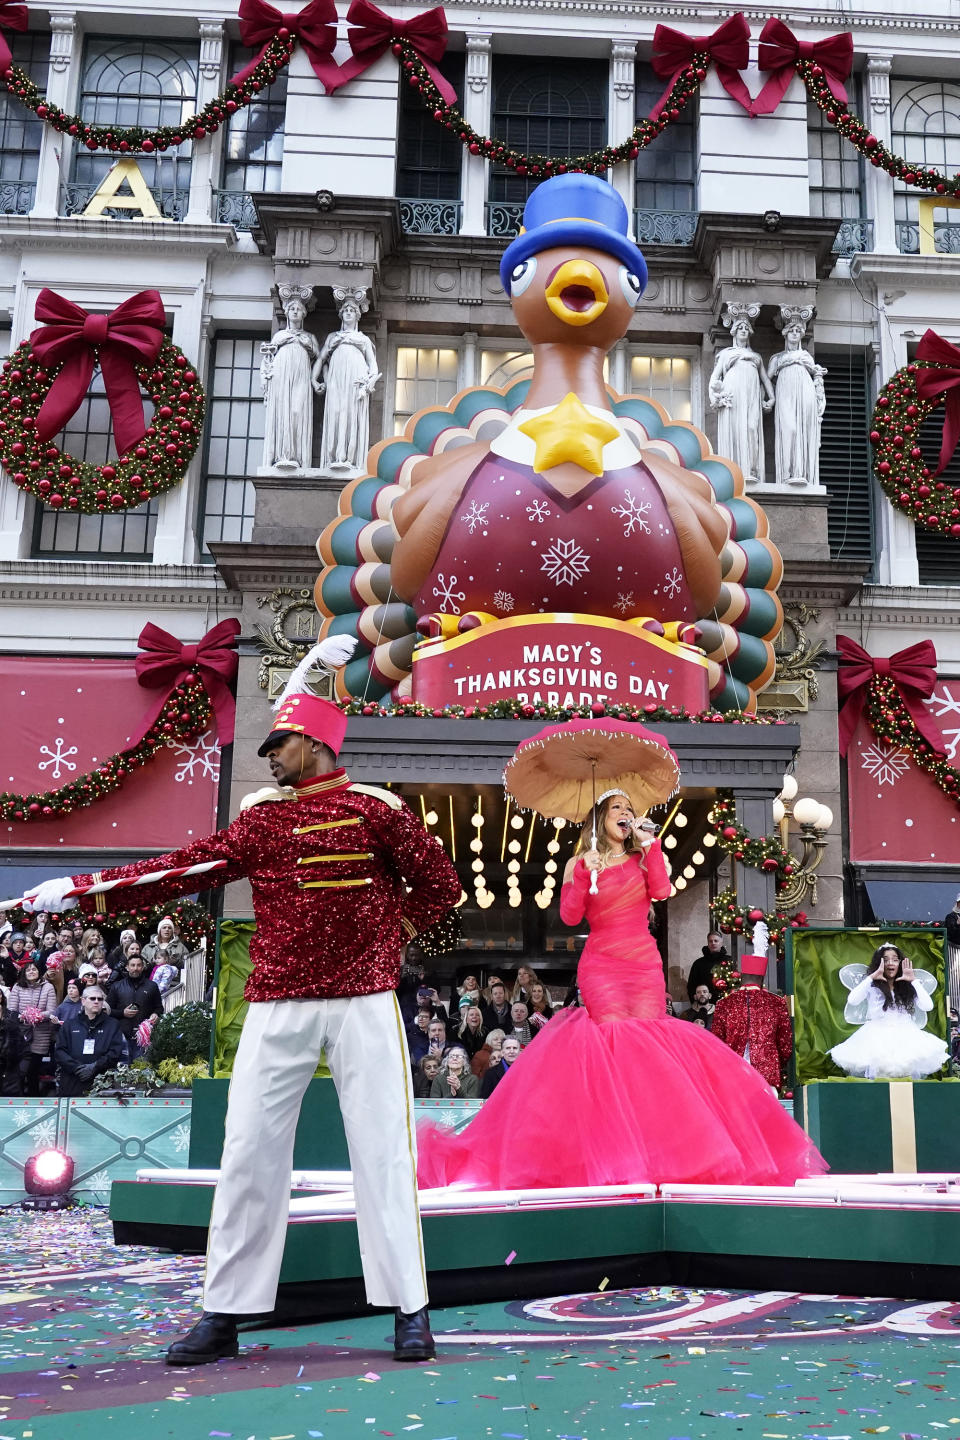 MACY'S THANKSGIVING DAY PARADE -- "2022 Macy's Thanksgiving Day Parade" -- Pictured: Mariah Carey -- (Photo by: Cara Howe/NBC via Getty Images)